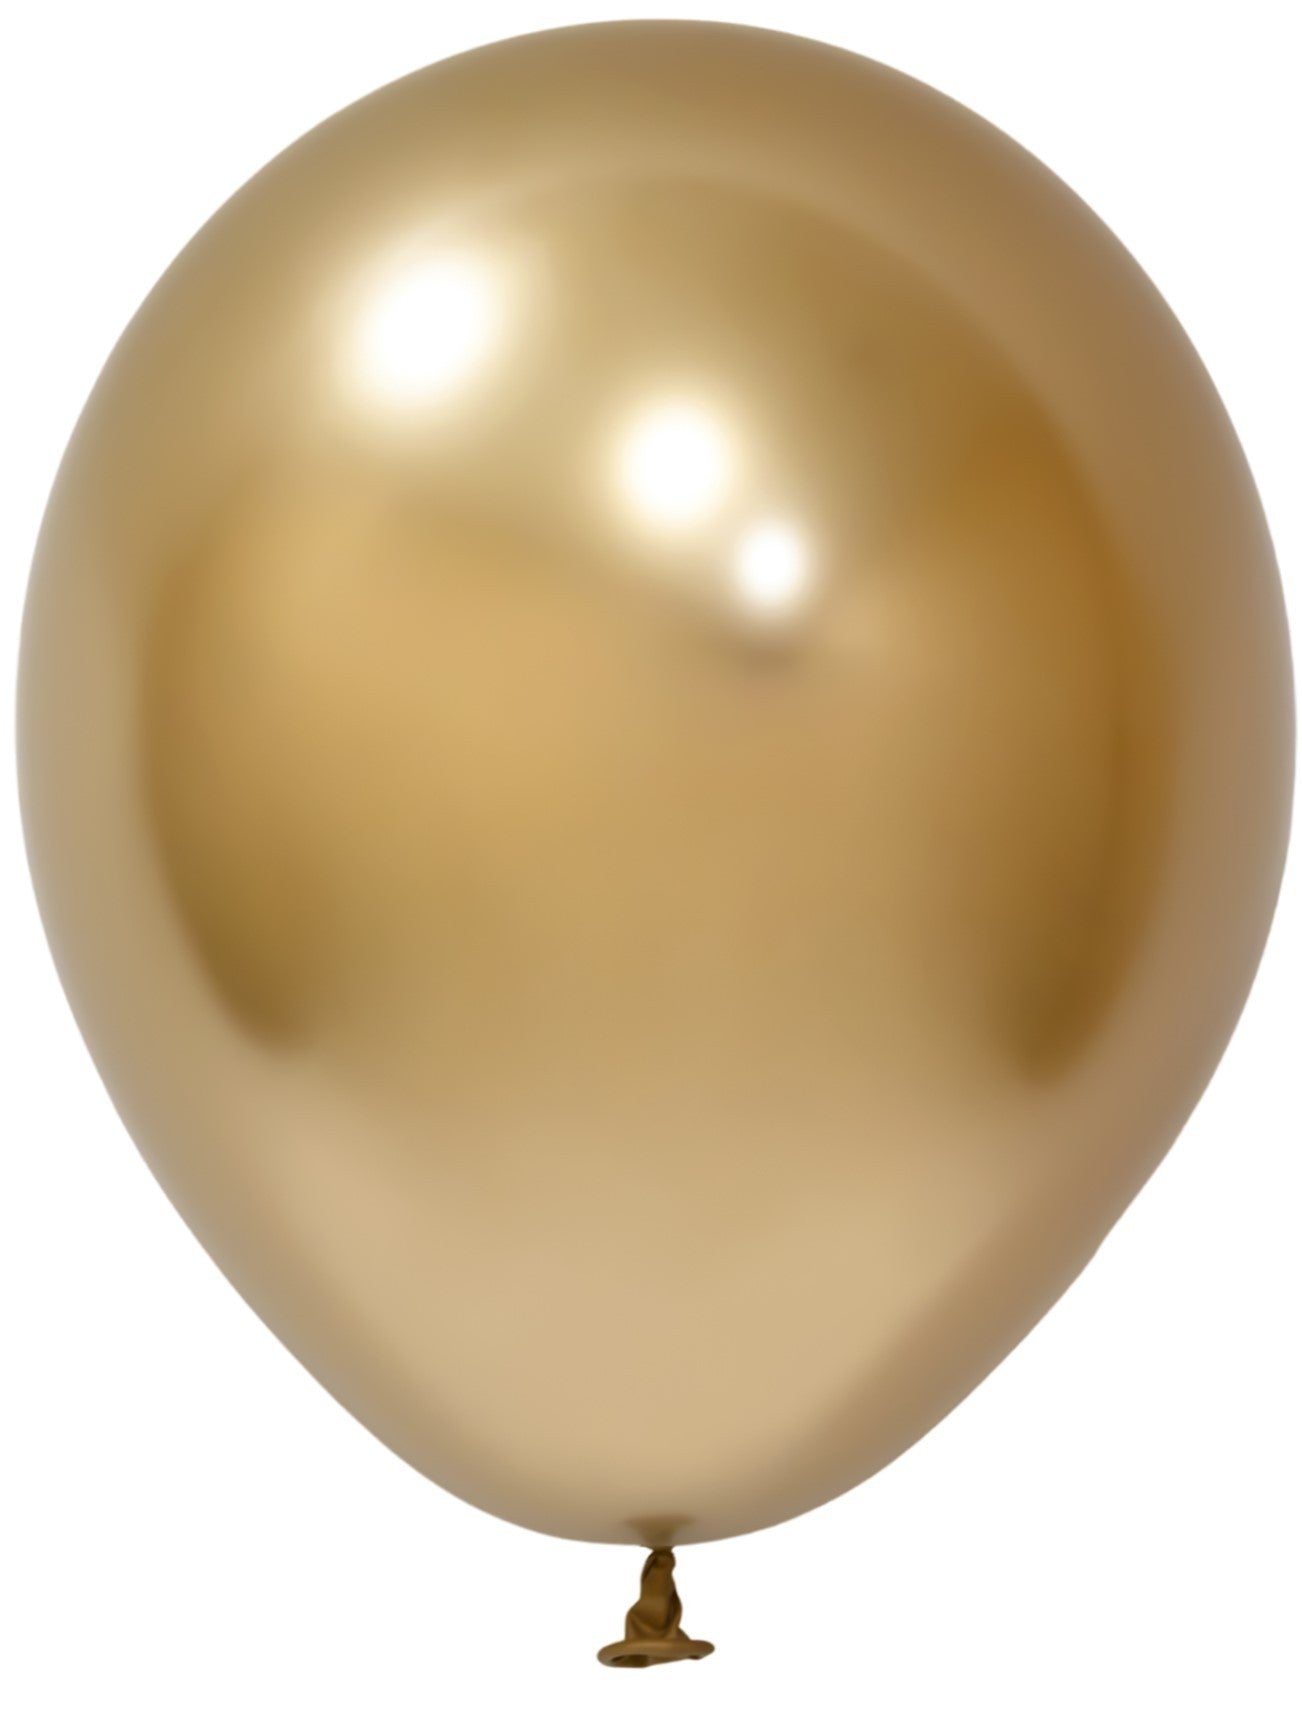 View Gold Chrome Latex Balloon 10inch Pack of 50 information